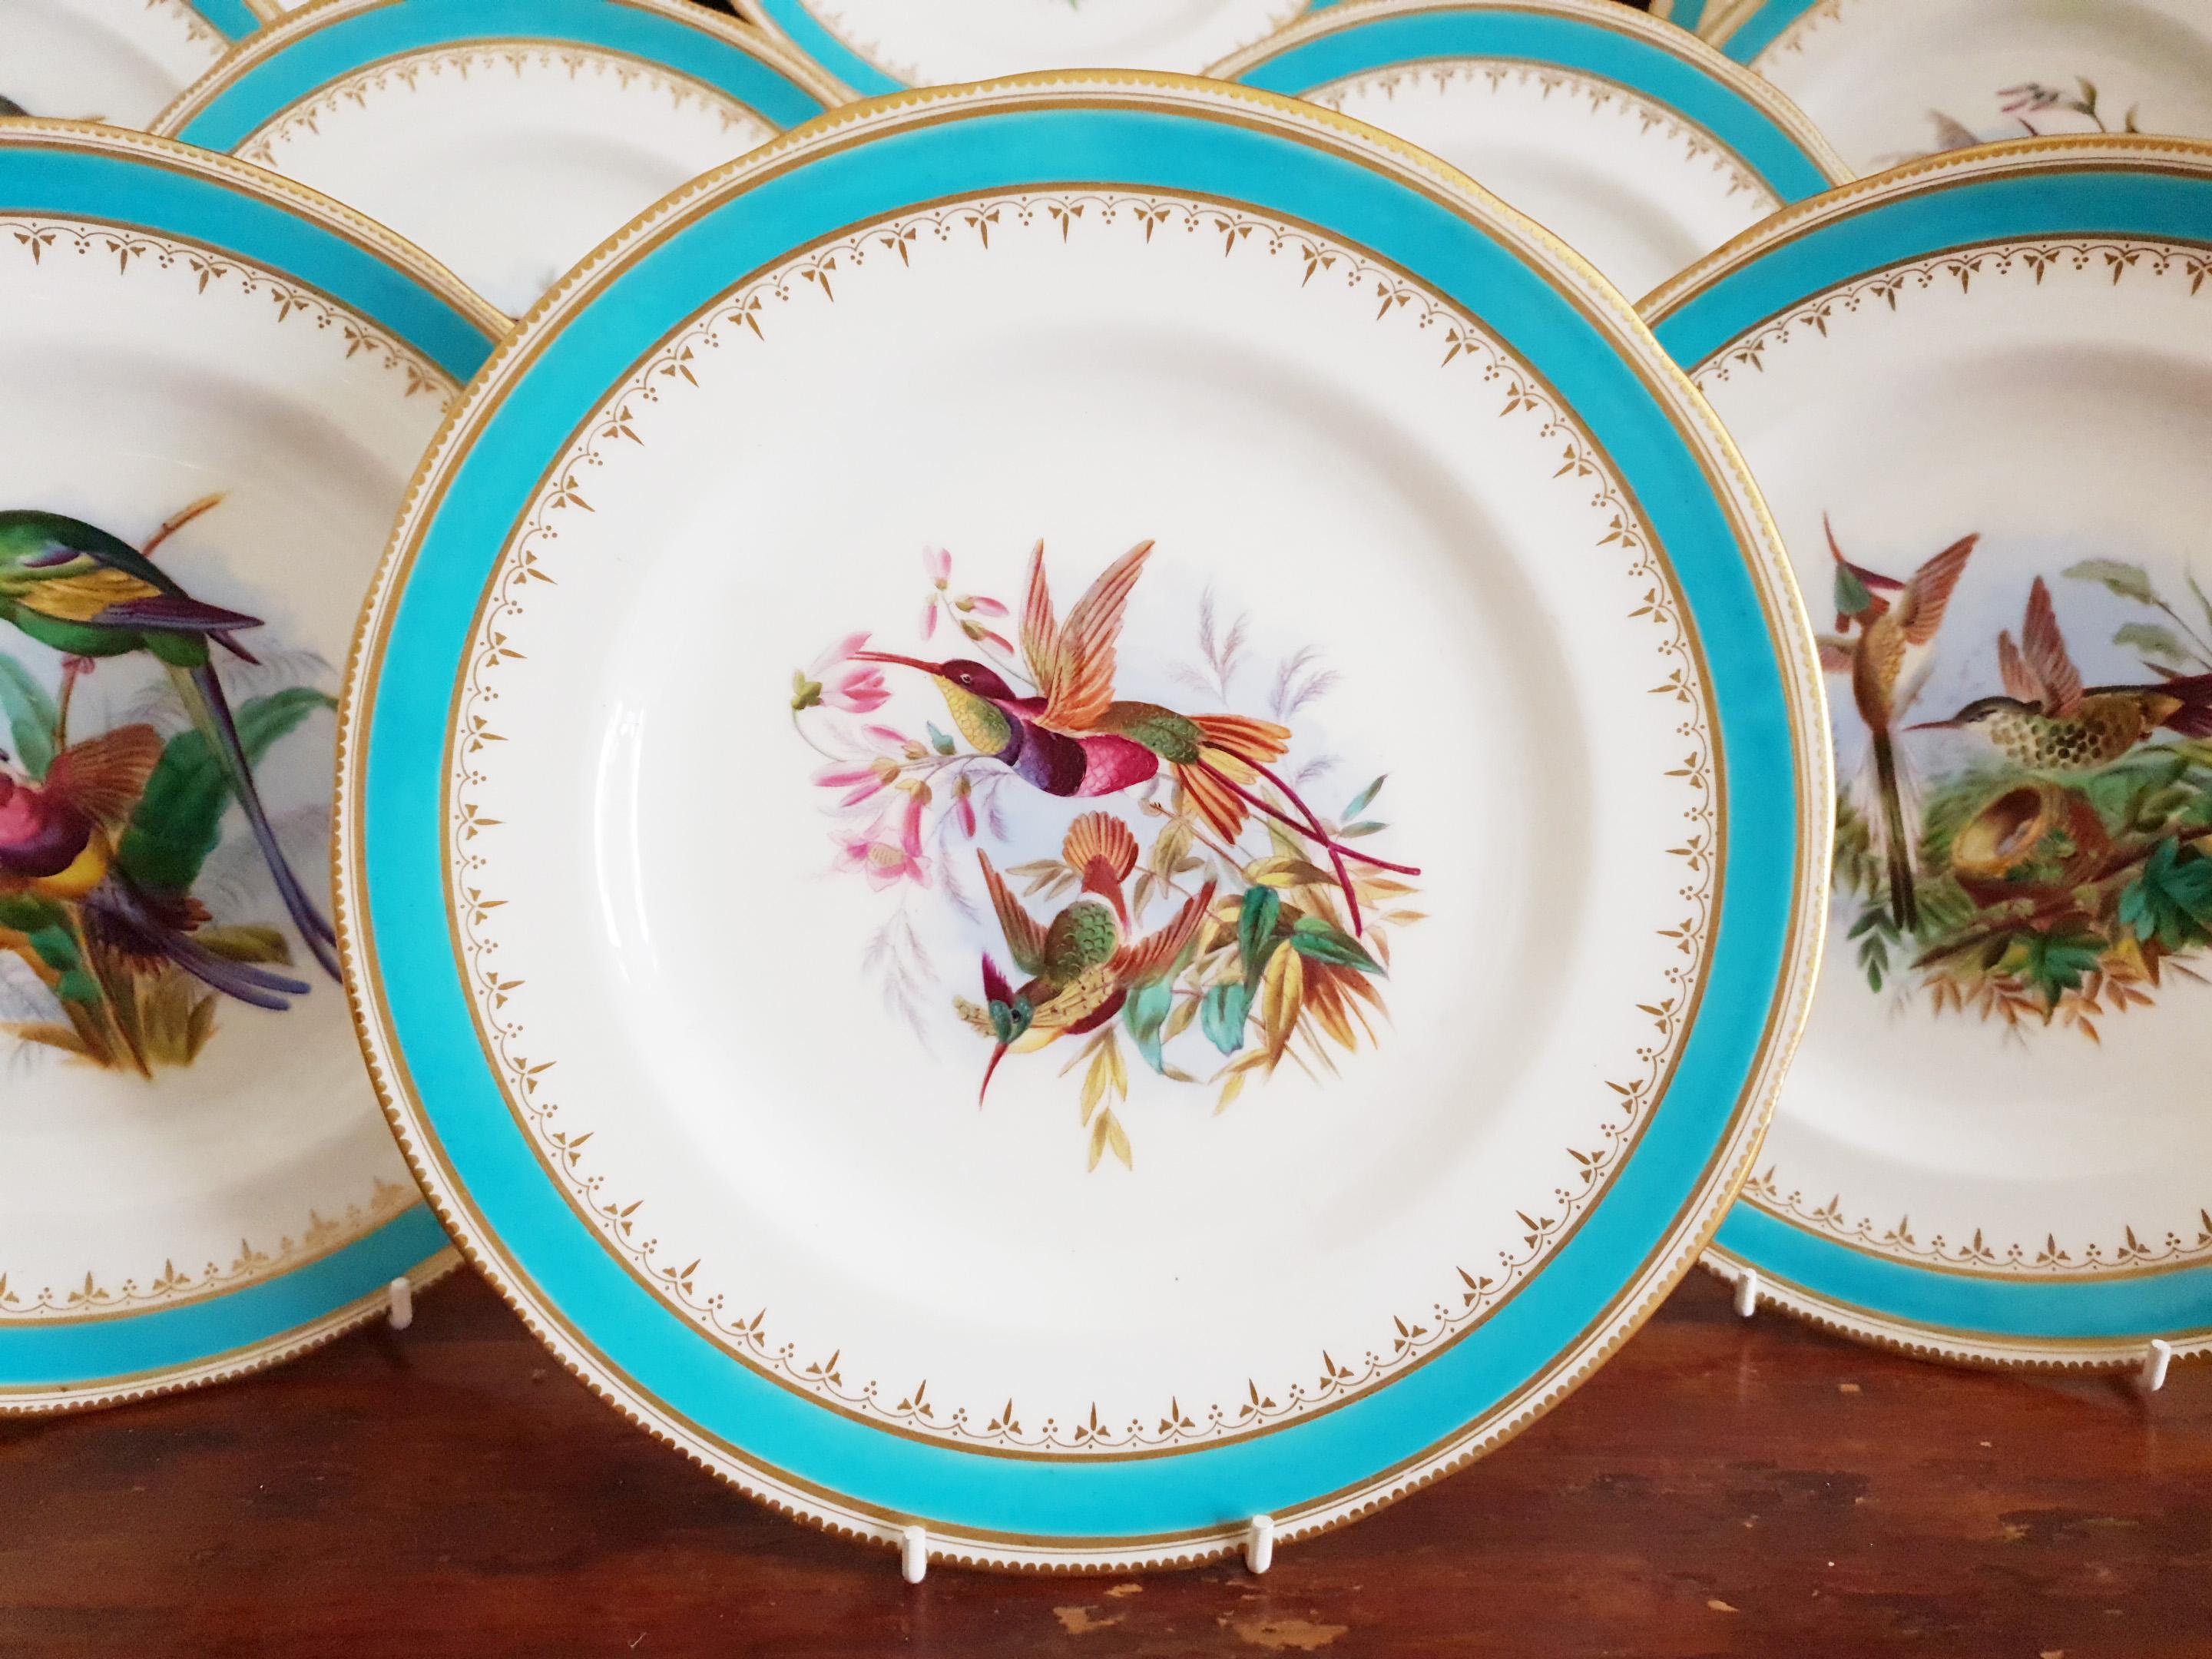 A Minton dessert service circa 1910, the plates decorated with humming birds and parrots perched on branches and flowers reserved on a white background. A turquoise border surrounds the edge within a gilt somewhat fleur de lys pattern and gilt rims.